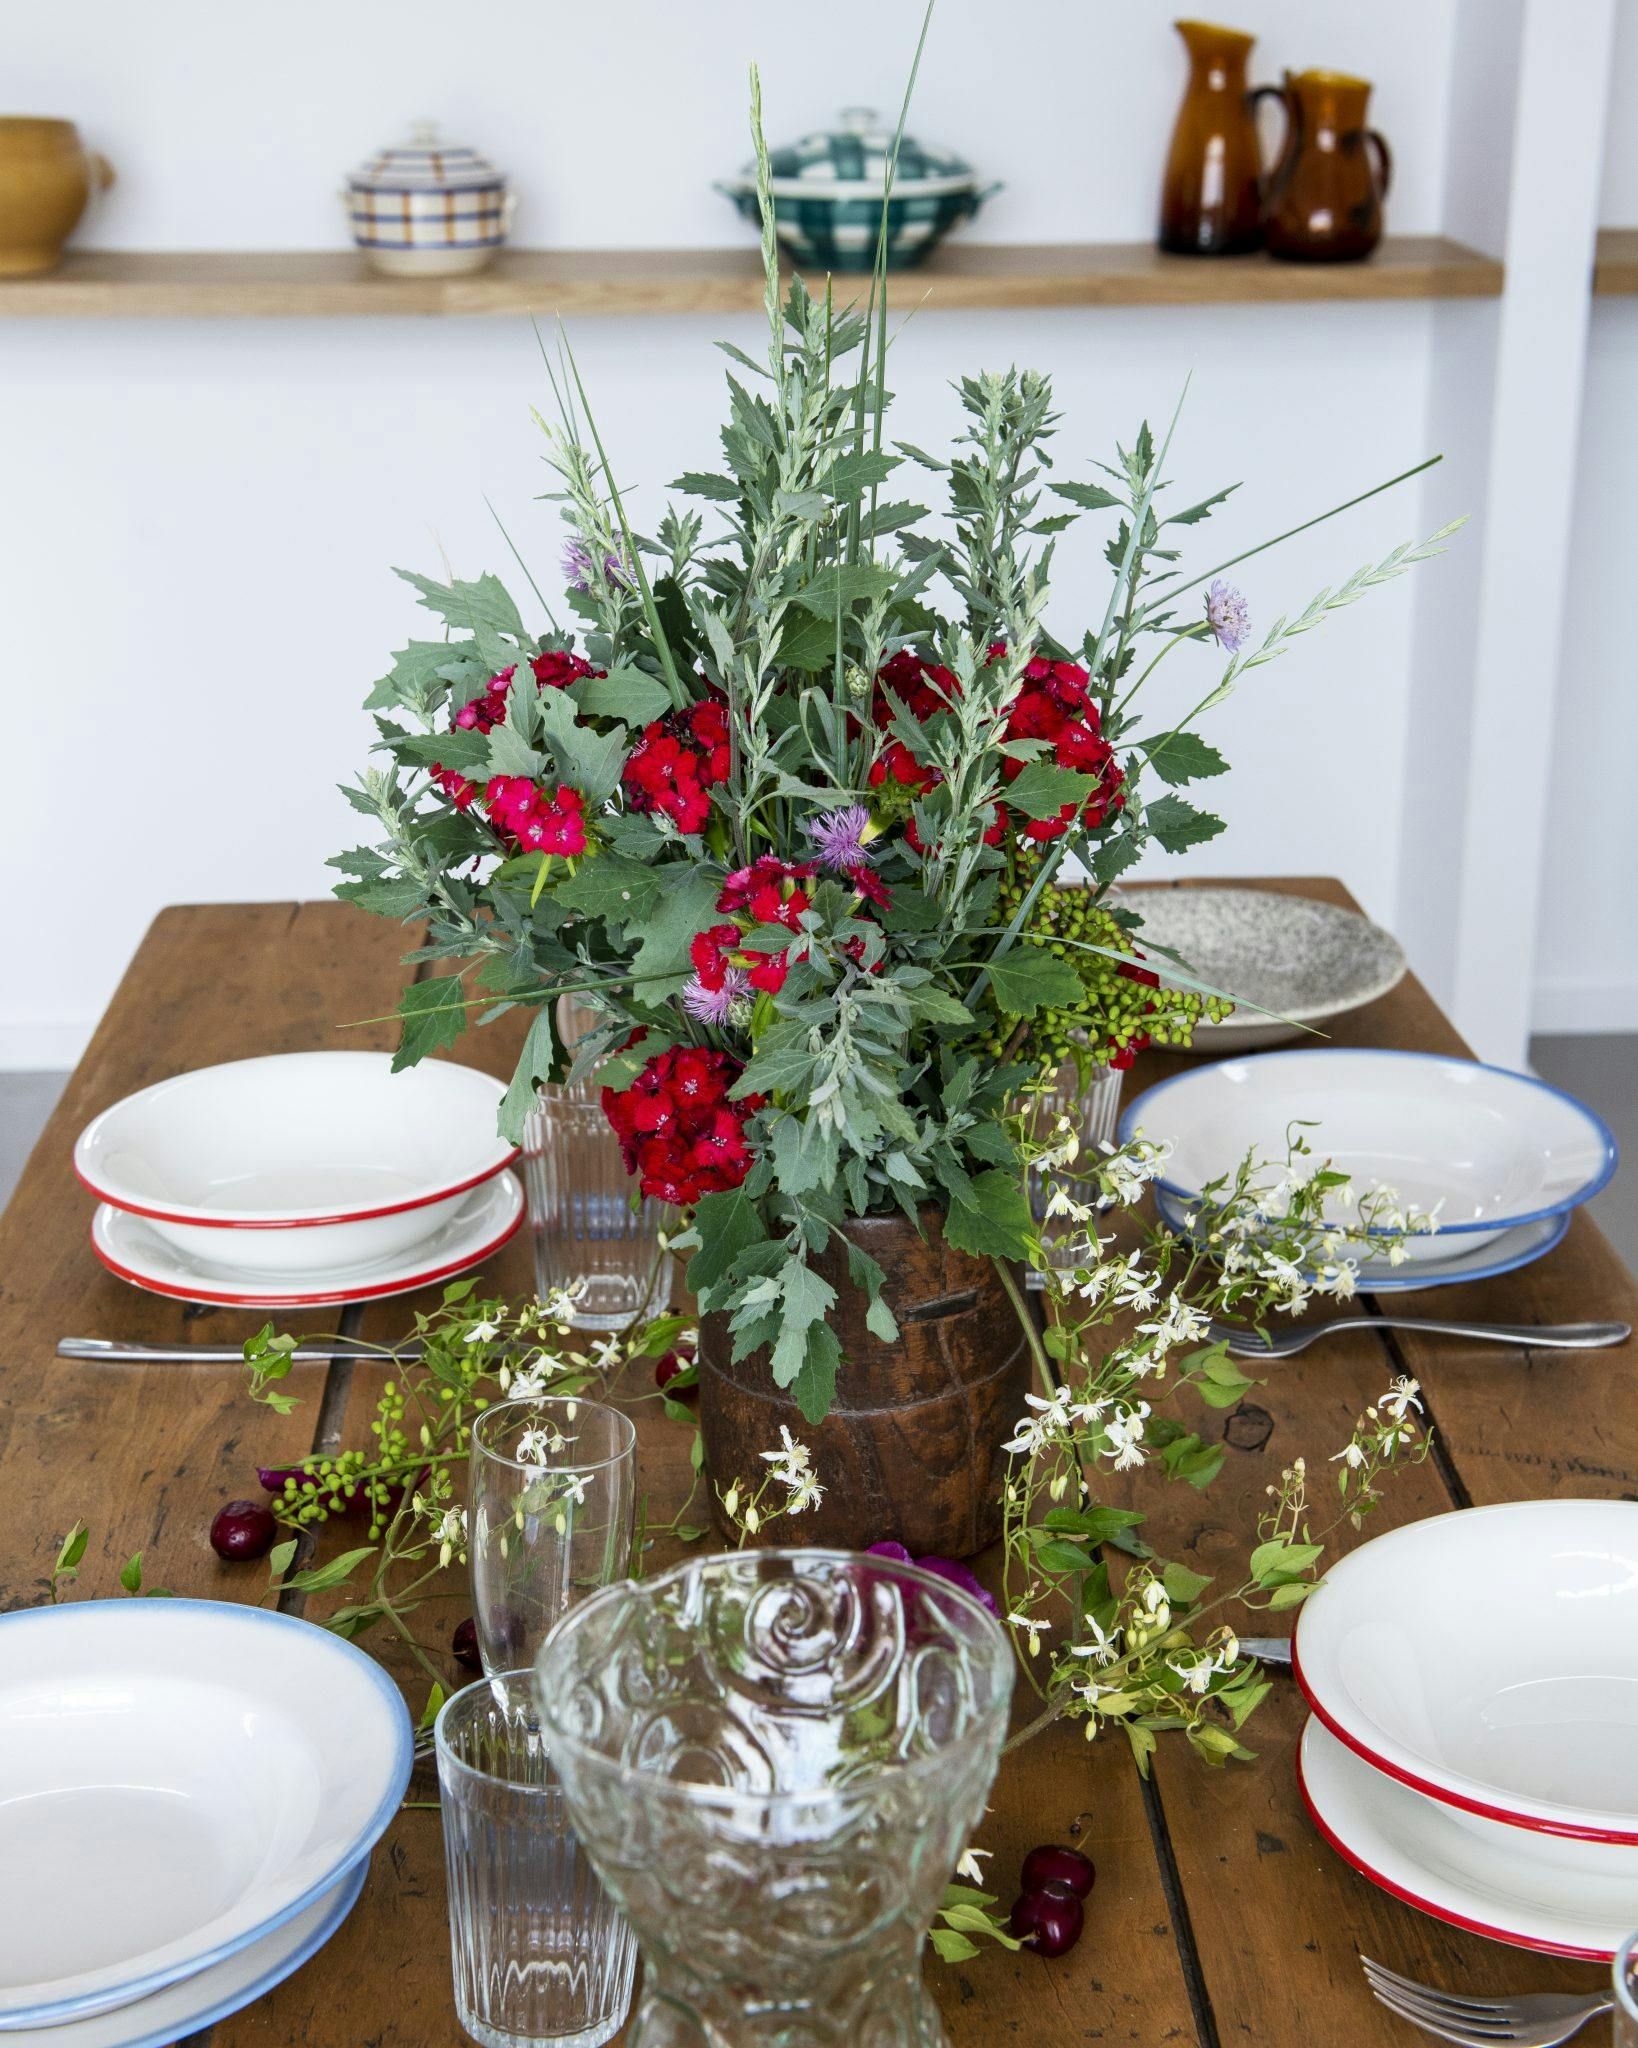 Prepared farm table in the dining room of the Atelier of Les Milles Roches with big central flower bouquet